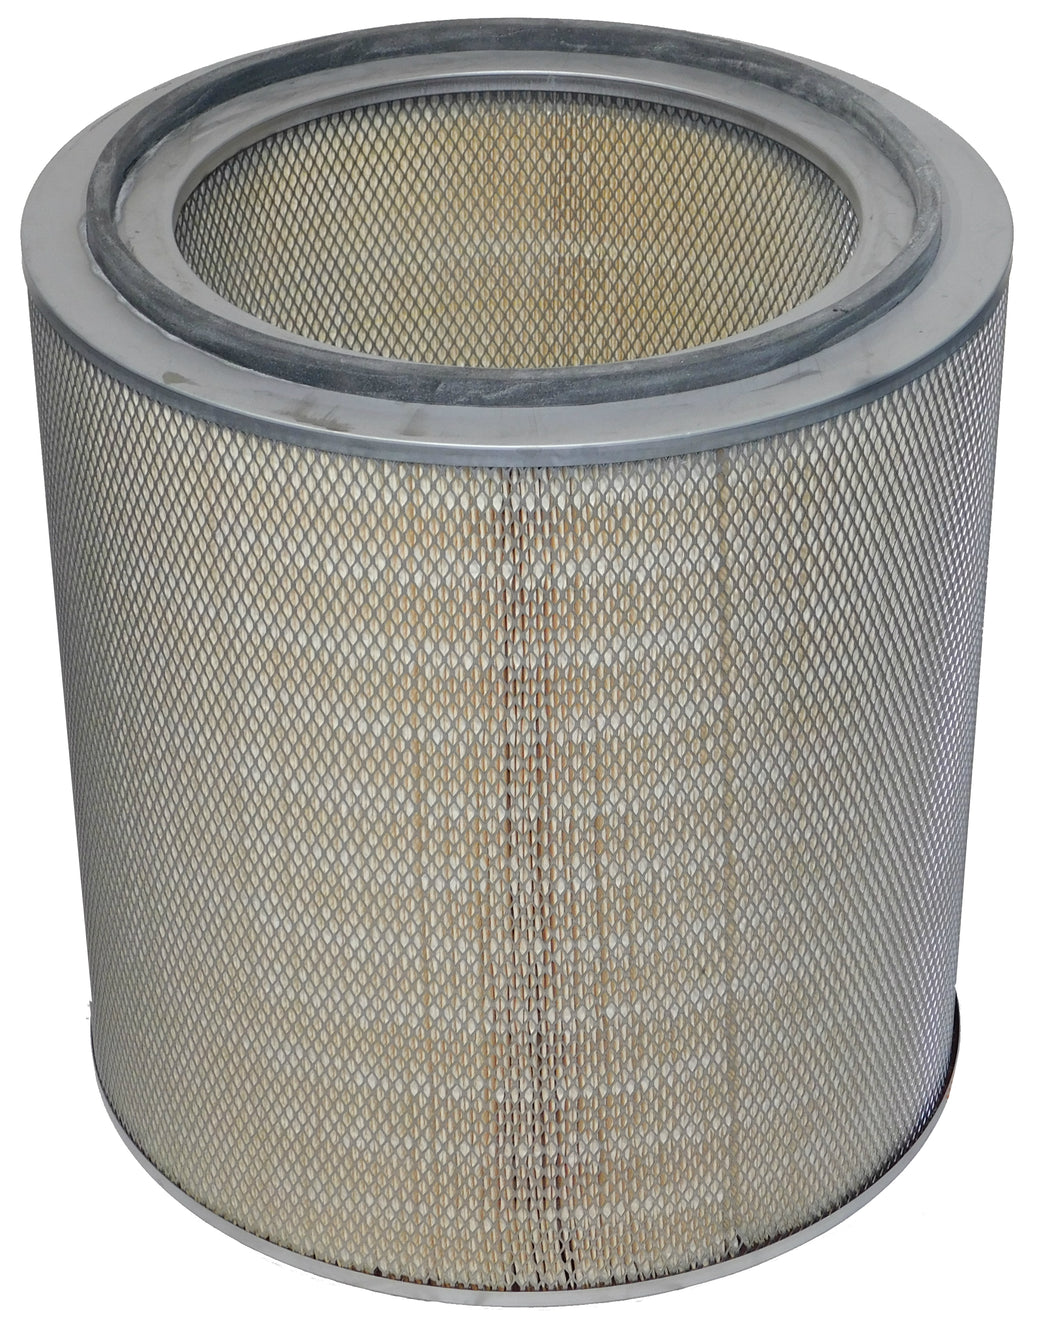 G82-7153 - Guardian - OEM Replacement Filter